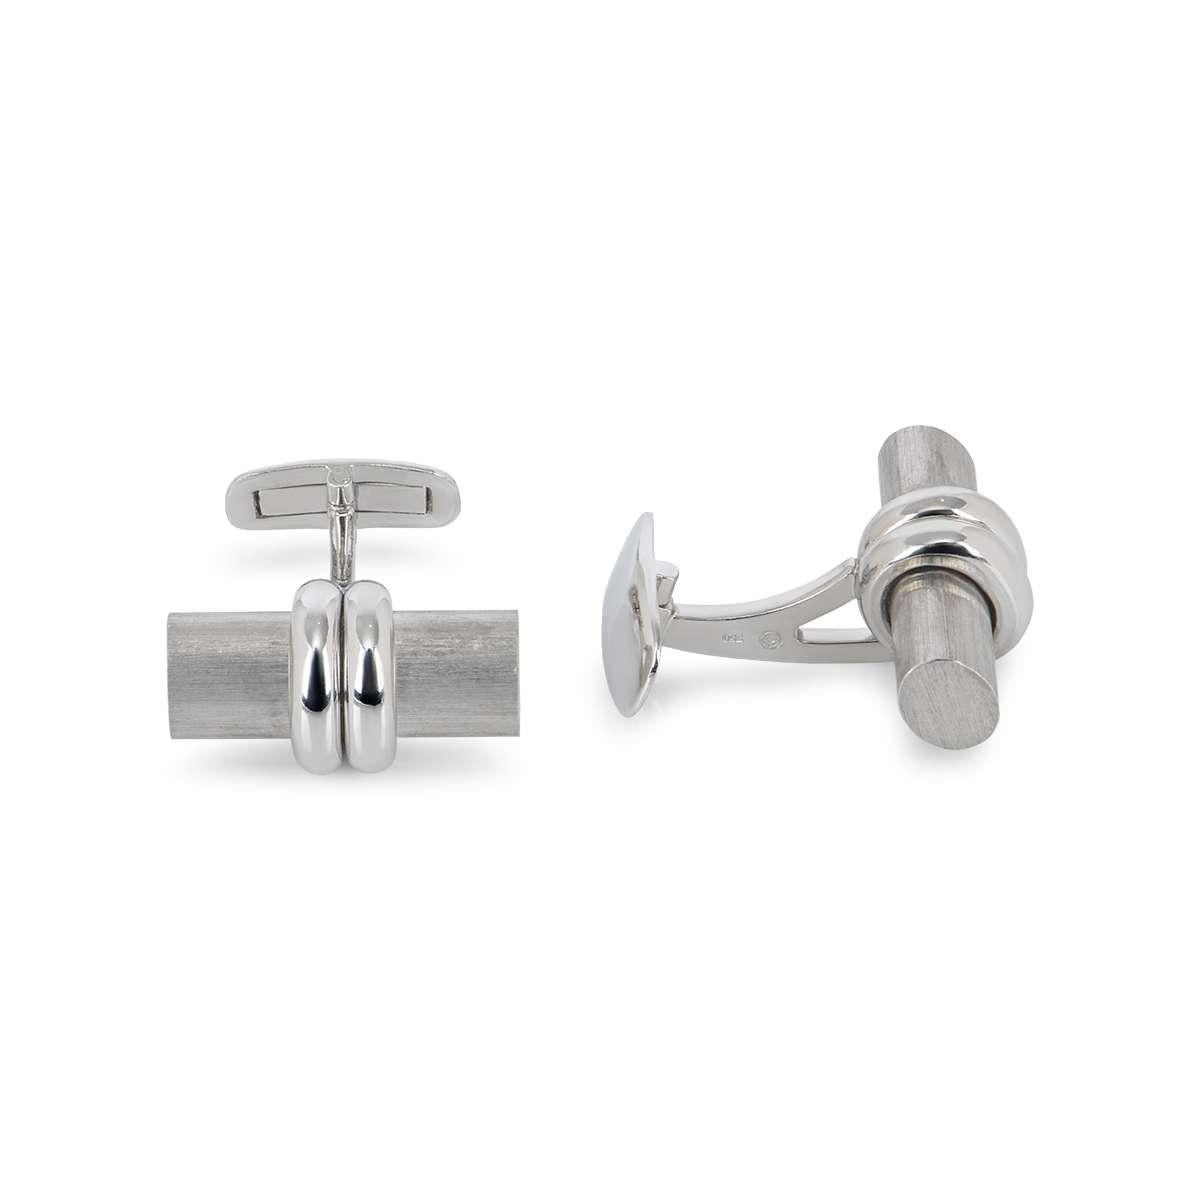 A classic pair of 18k white gold cufflinks. The cufflinks are set to a satin finish, oval T-bar front section, each complemented by swivel fittings in a polished finish. The cufflinks measure 20mm when worn in the cuff and have a gross weight of